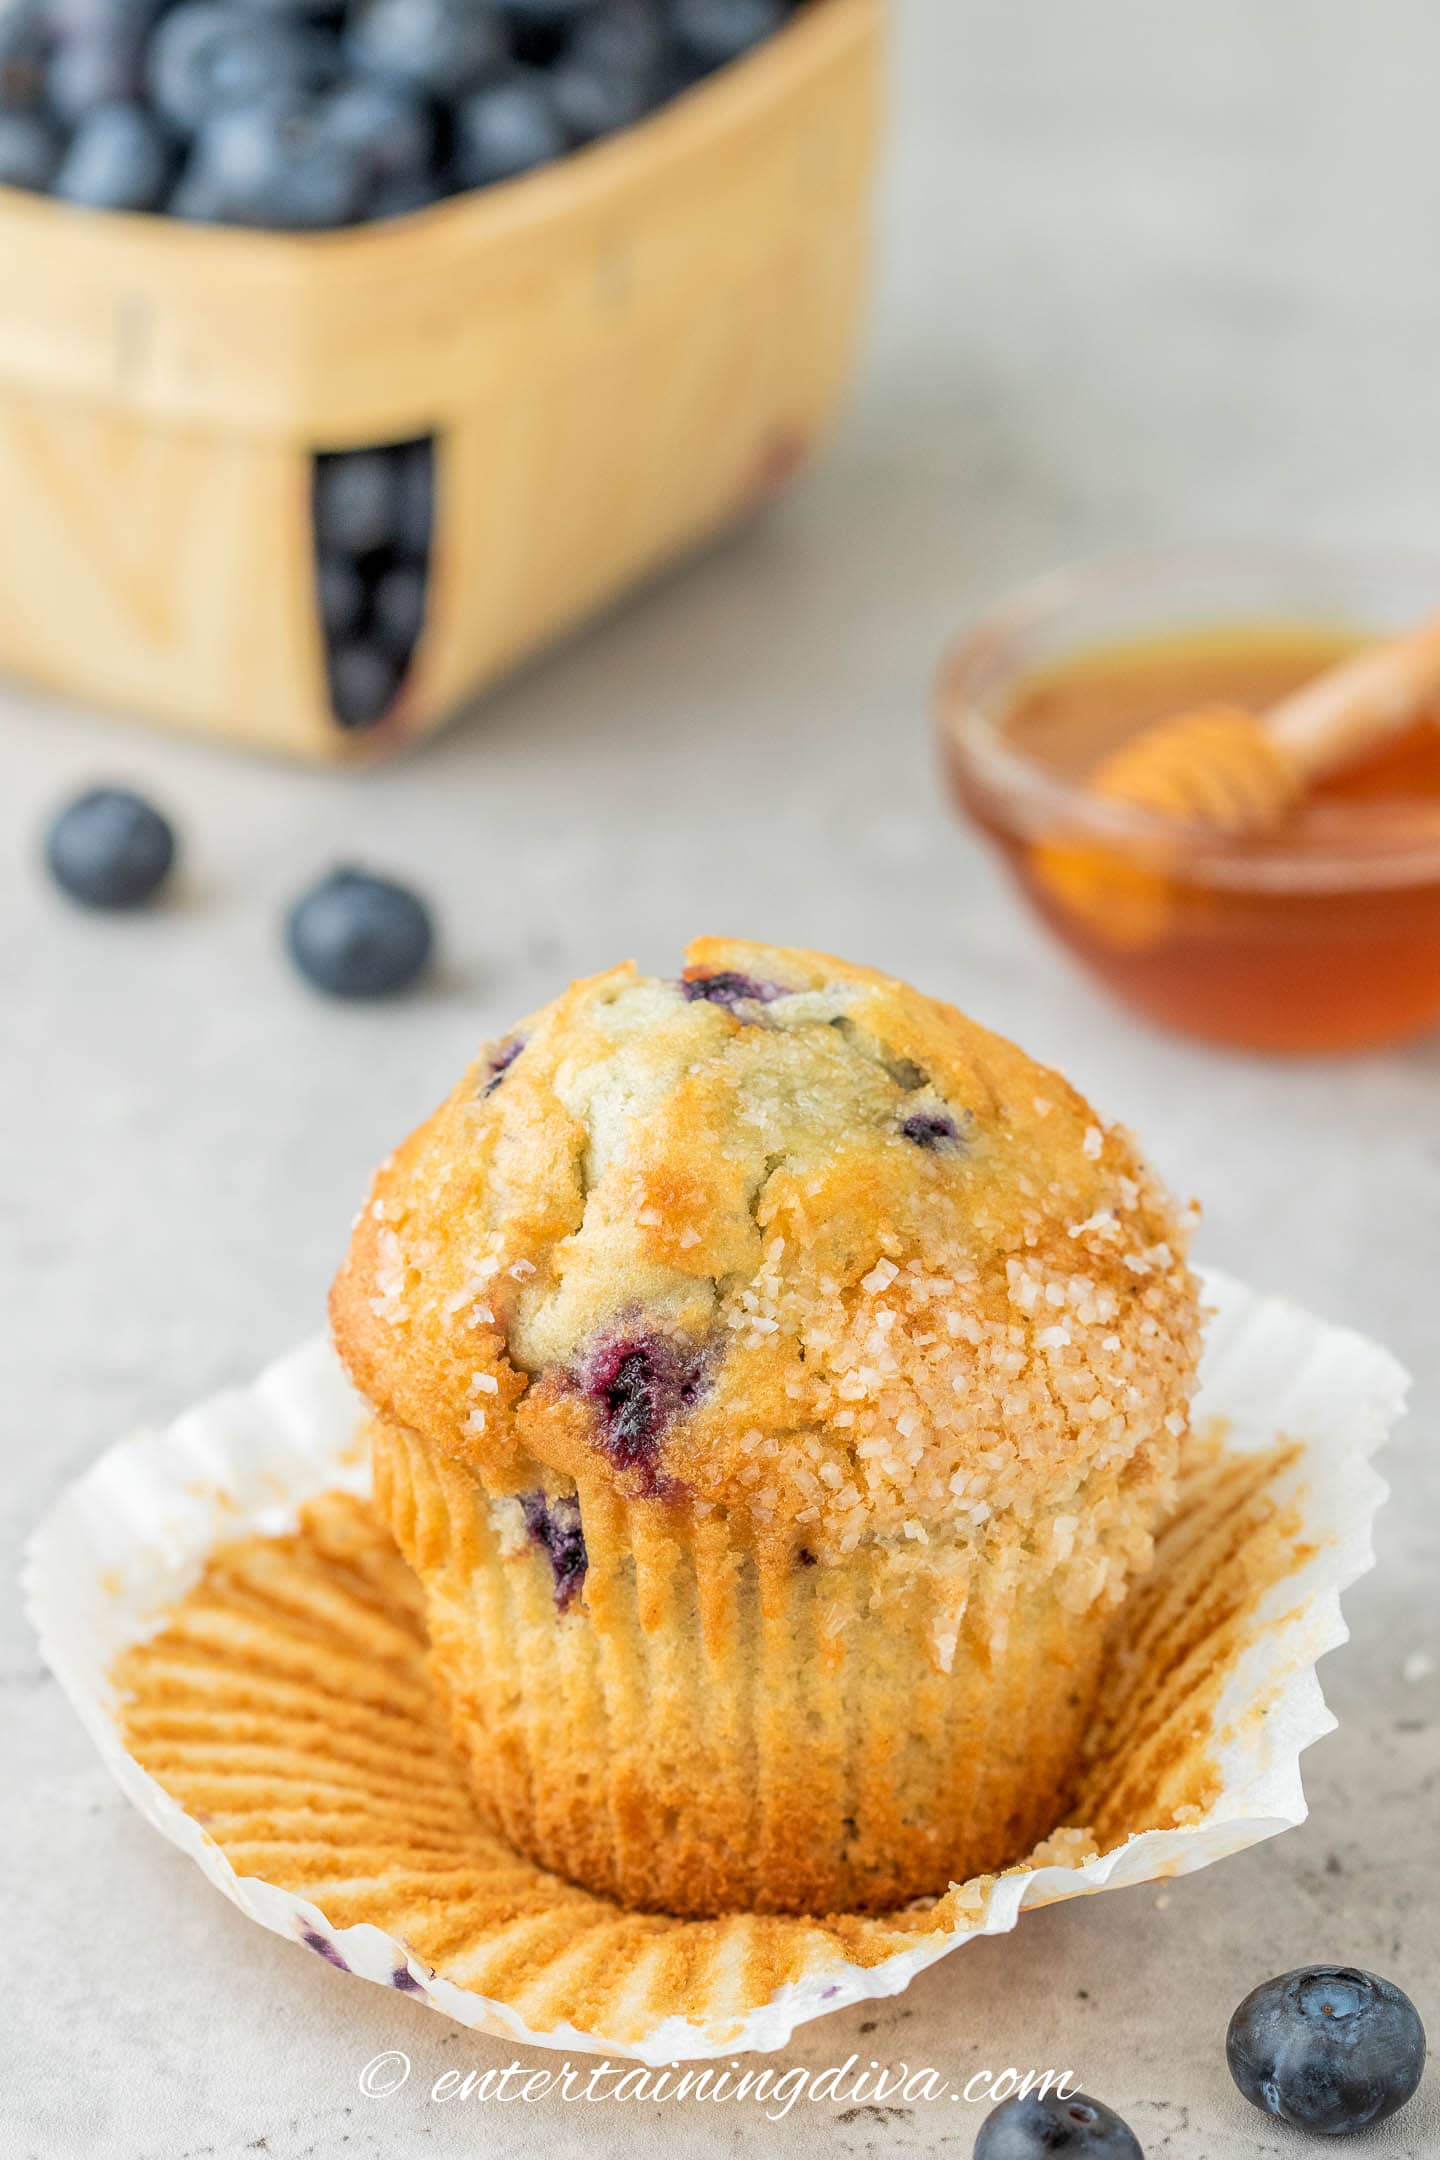 A blueberry muffin with the wrapper peeled off